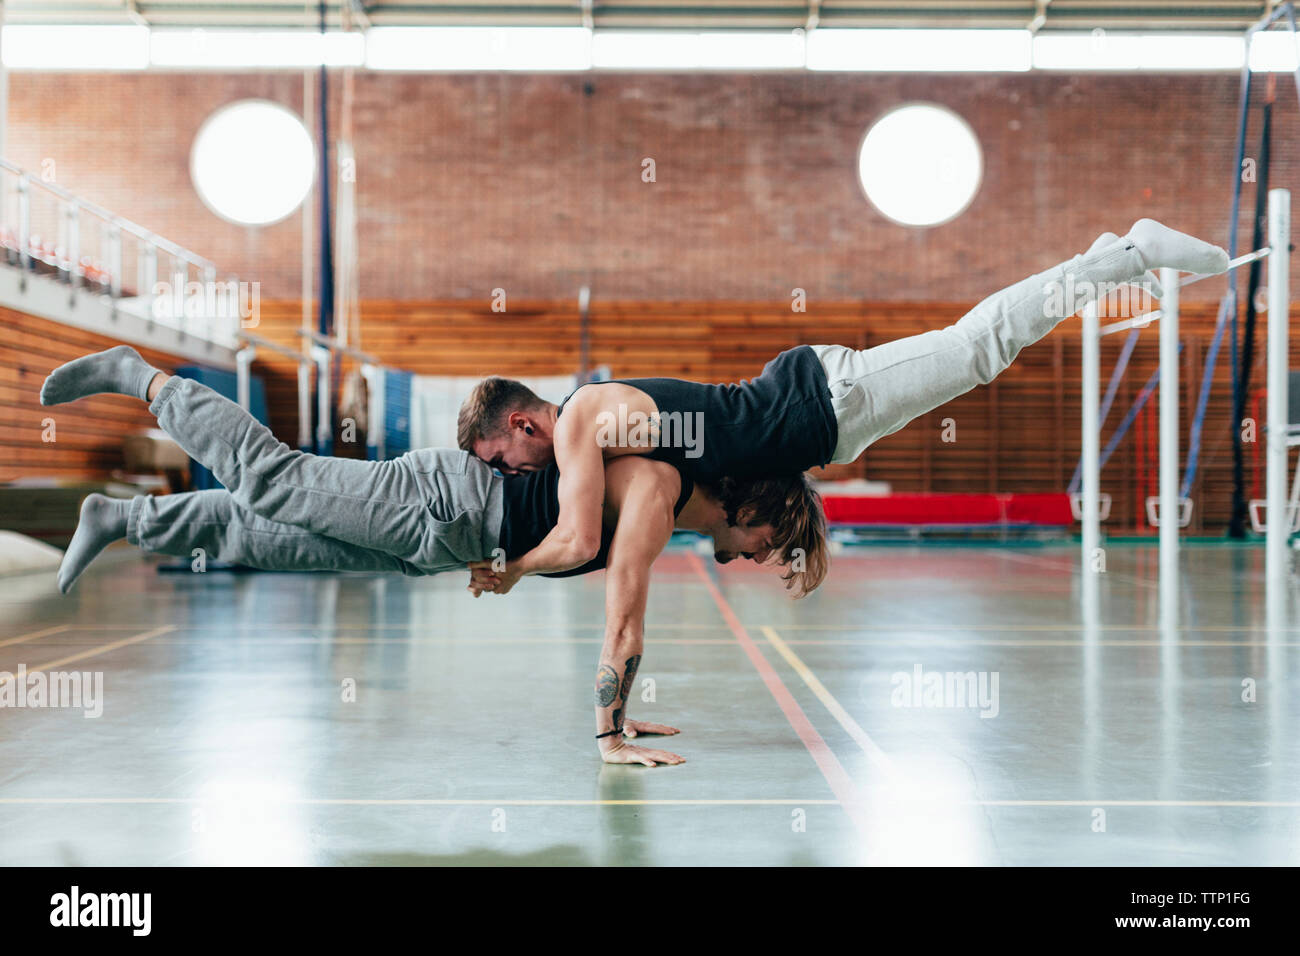 Full length side view of gymnasts practicing handstand at gym Stock Photo